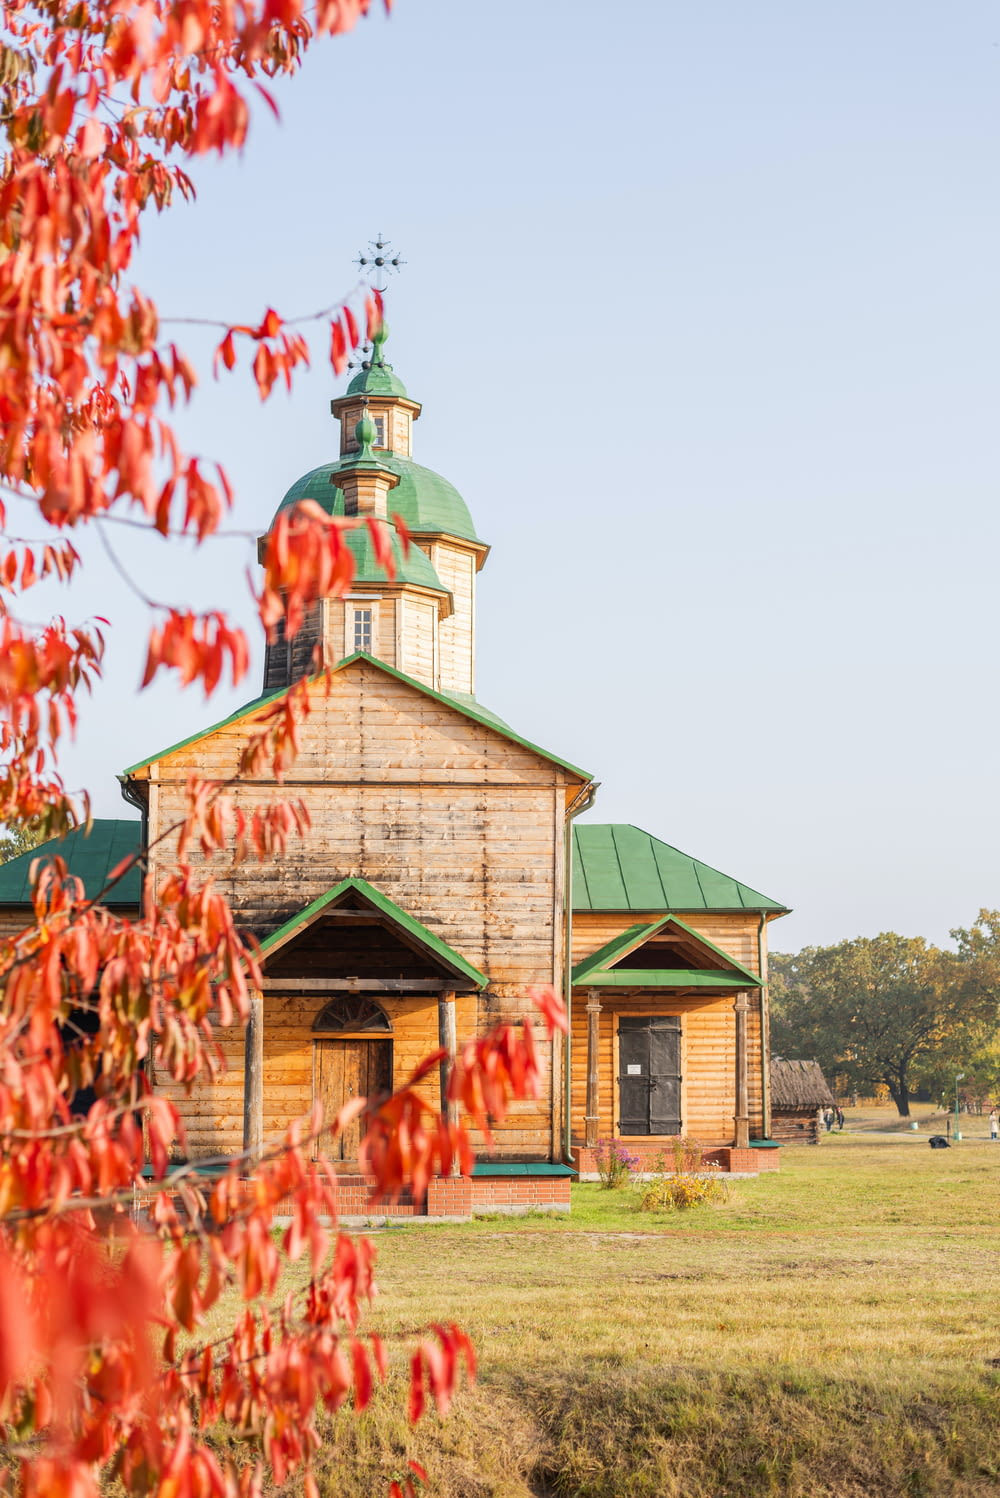 an old wooden church with a green roof